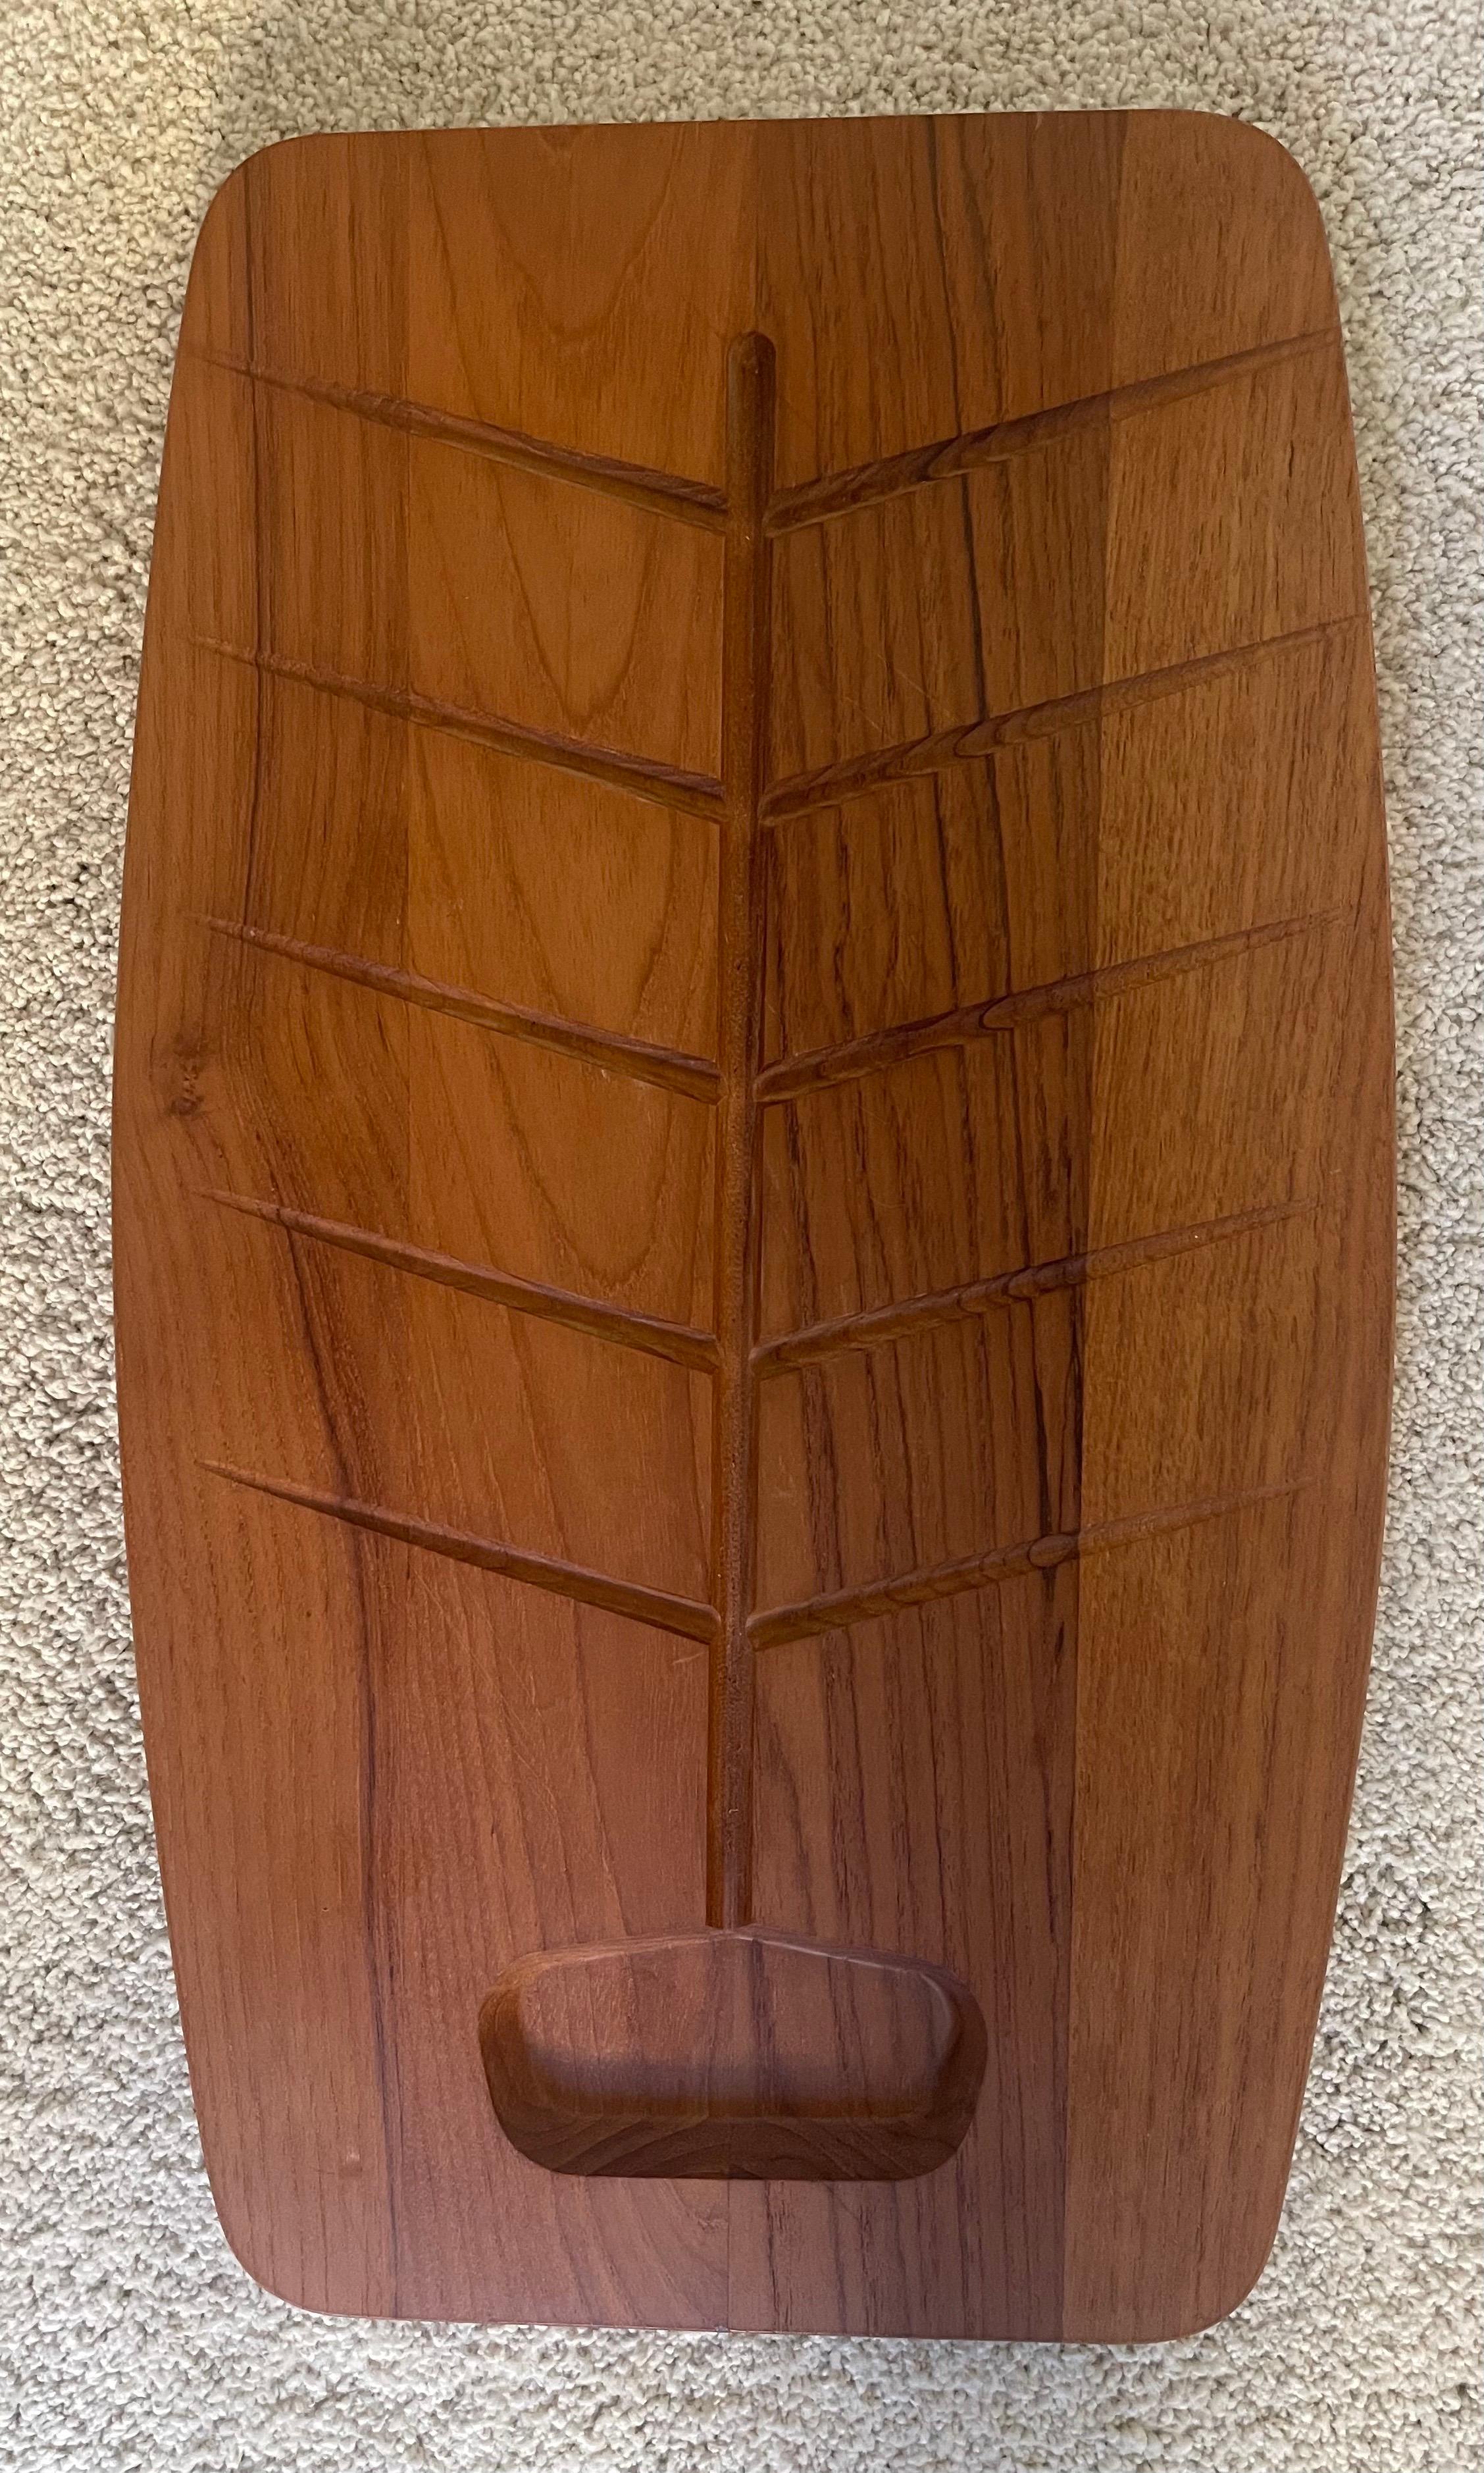 20th Century Danish Modern Staved Teak Carving / Cutting Board For Sale